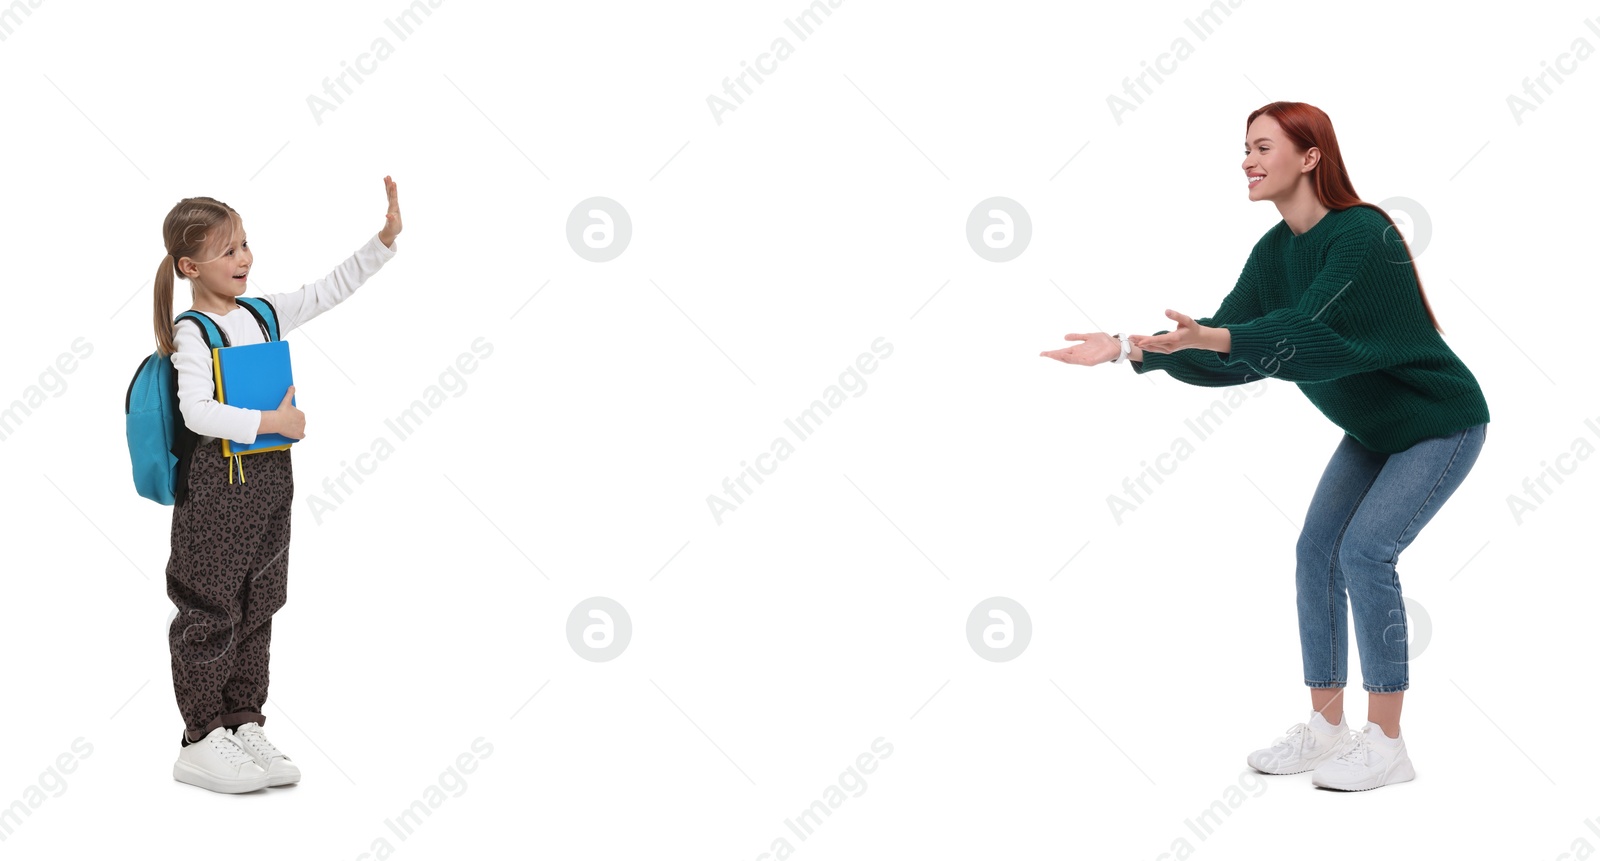 Image of Mother meeting her daughter after school on white background